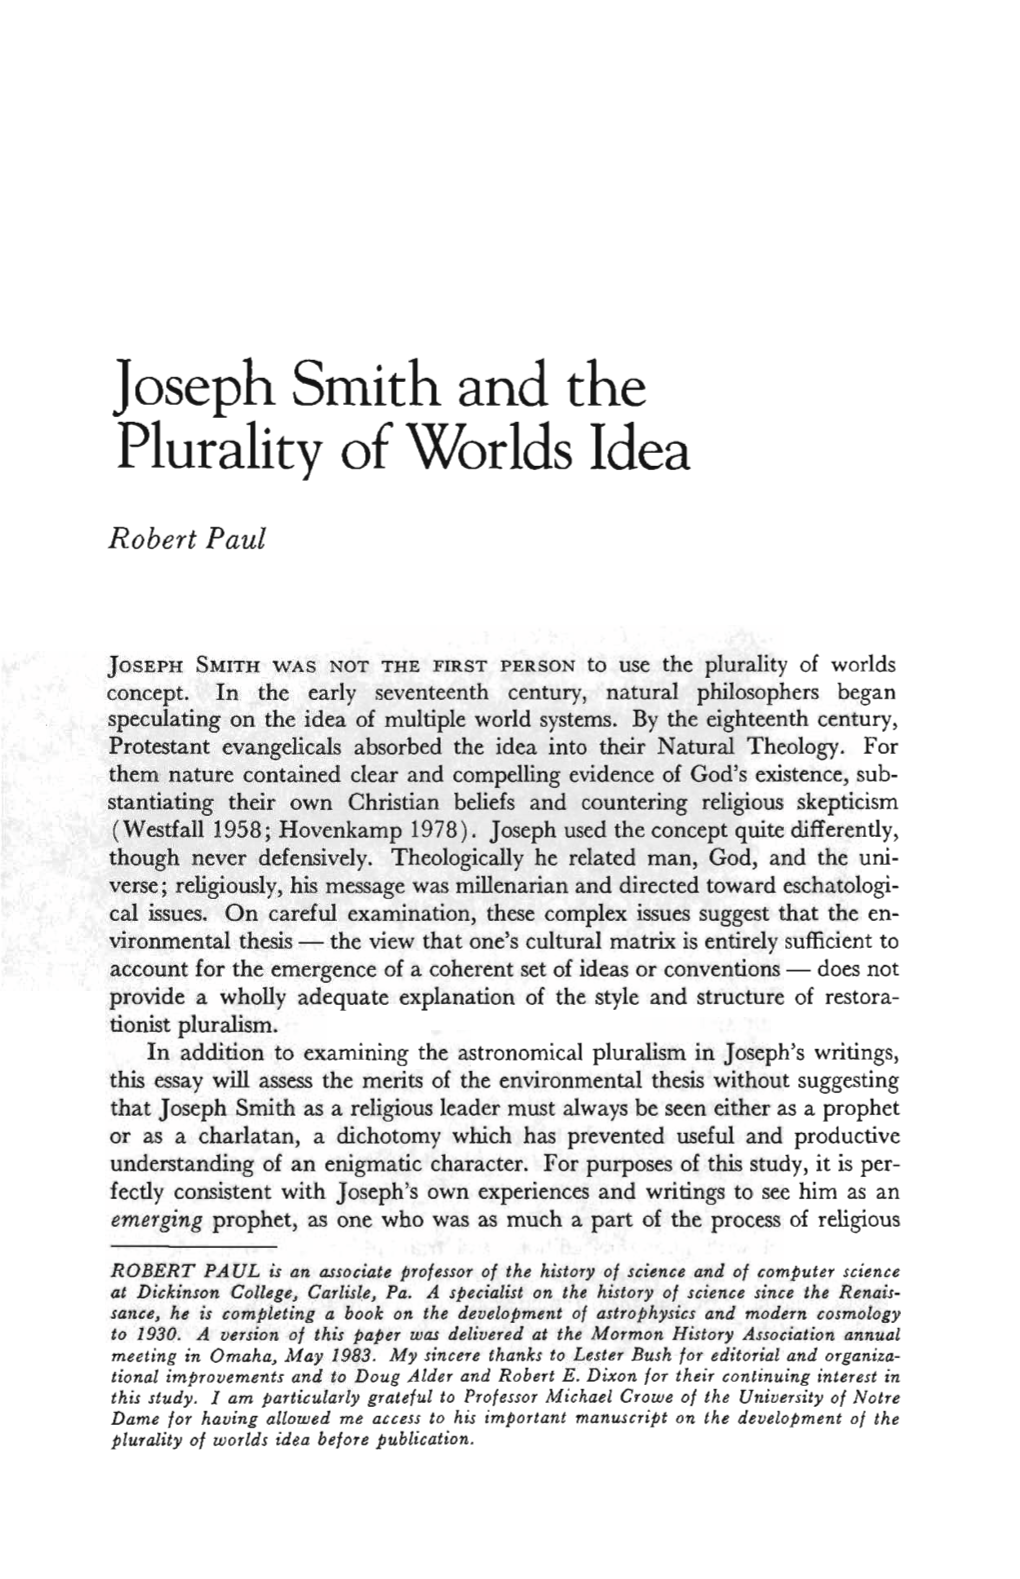 Joseph Smith and the Plurality of Worlds Idea